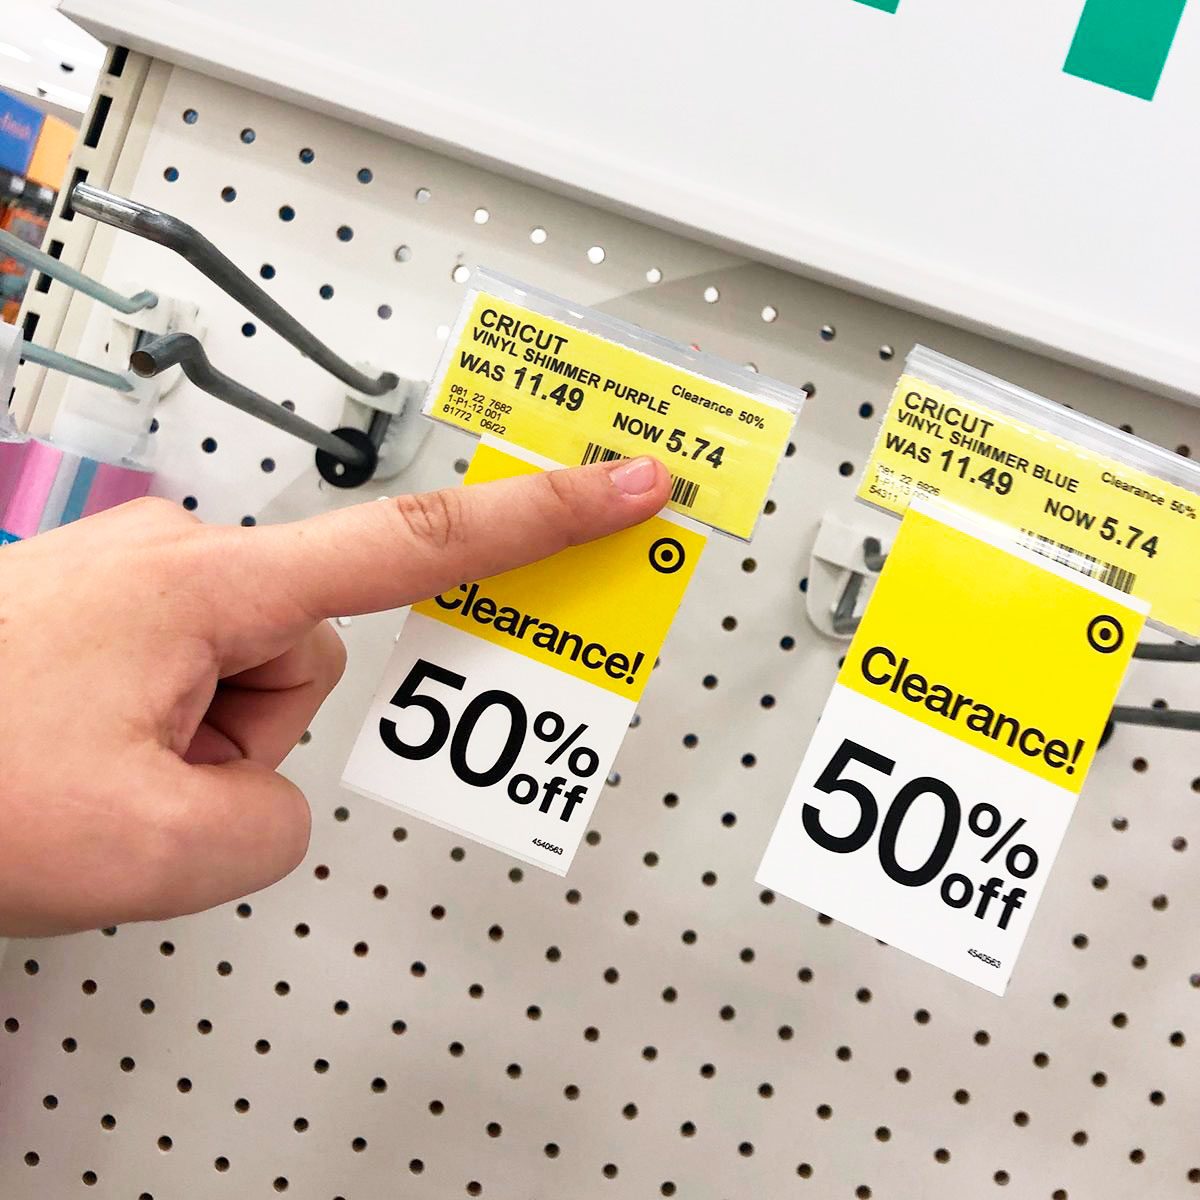 The Discreet Target Tag Number That Predicts The Final Sale Price On Home  Goods